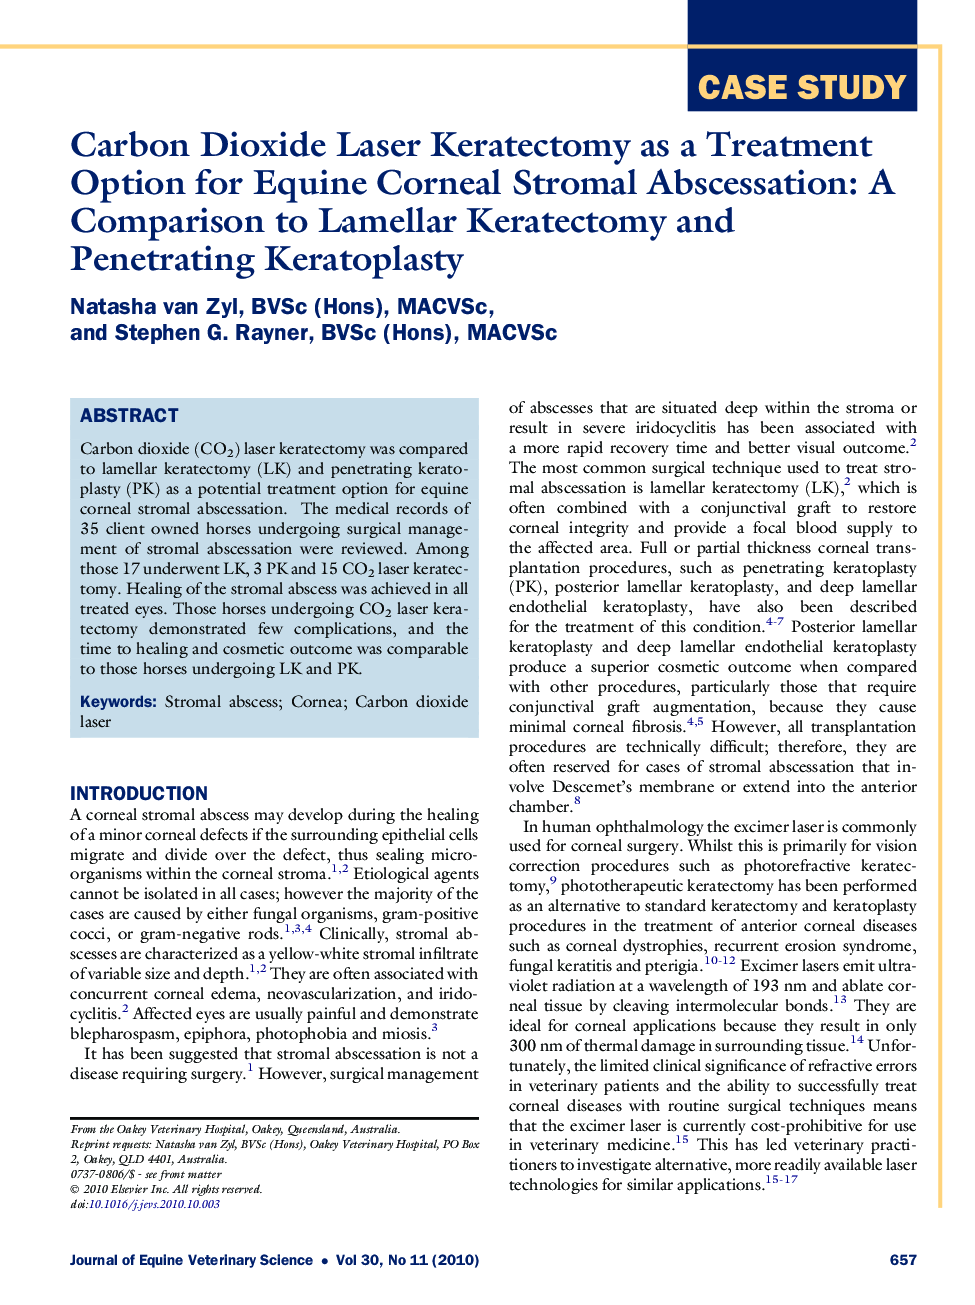 Carbon Dioxide Laser Keratectomy as a Treatment Option for Equine Corneal Stromal Abscessation: A Comparison to Lamellar Keratectomy and Penetrating Keratoplasty